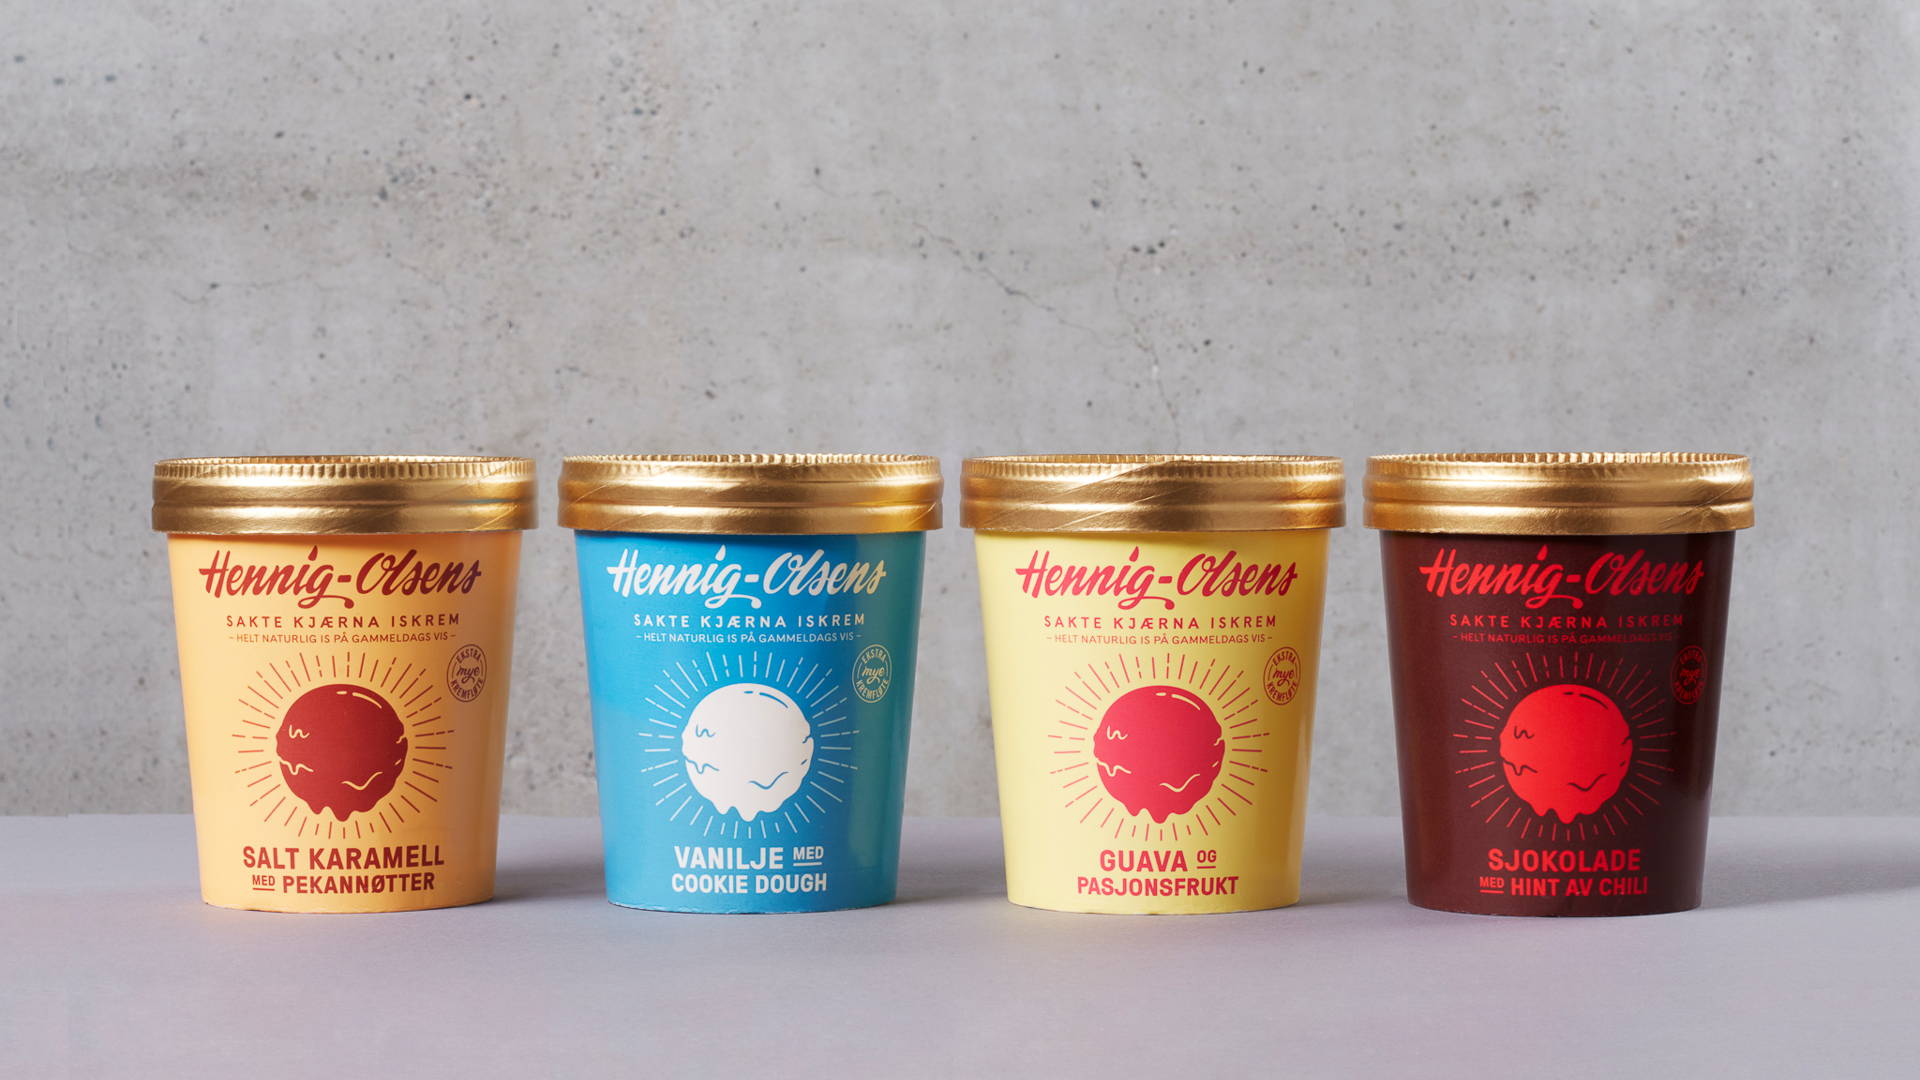 Featured image for This Norwegian Ice Cream Comes With a Retro-Inspired New Look